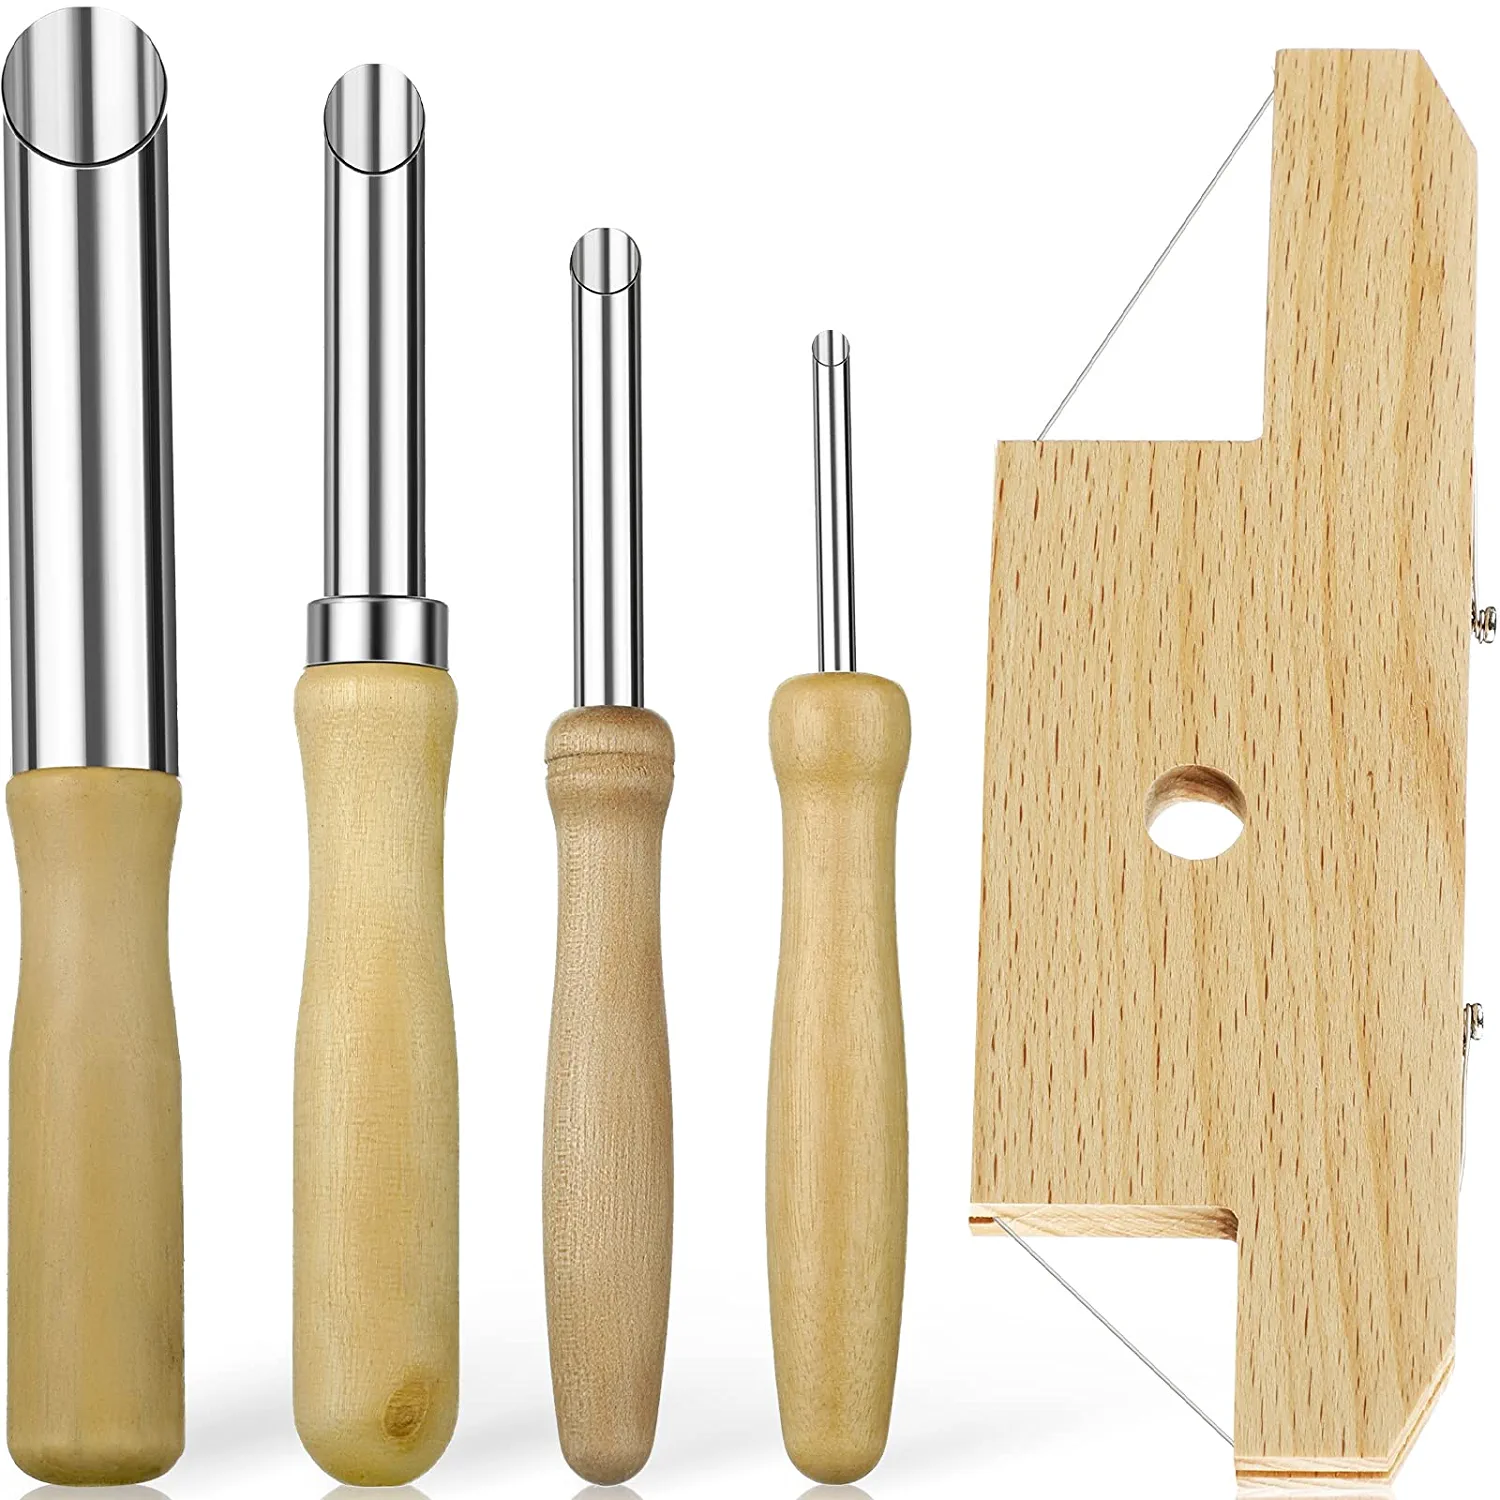 5 Pcs Pottery Clay Tools Set Includes Wood And Wire Bevel Cutter And 4 Pcs Circu - £15.97 GBP